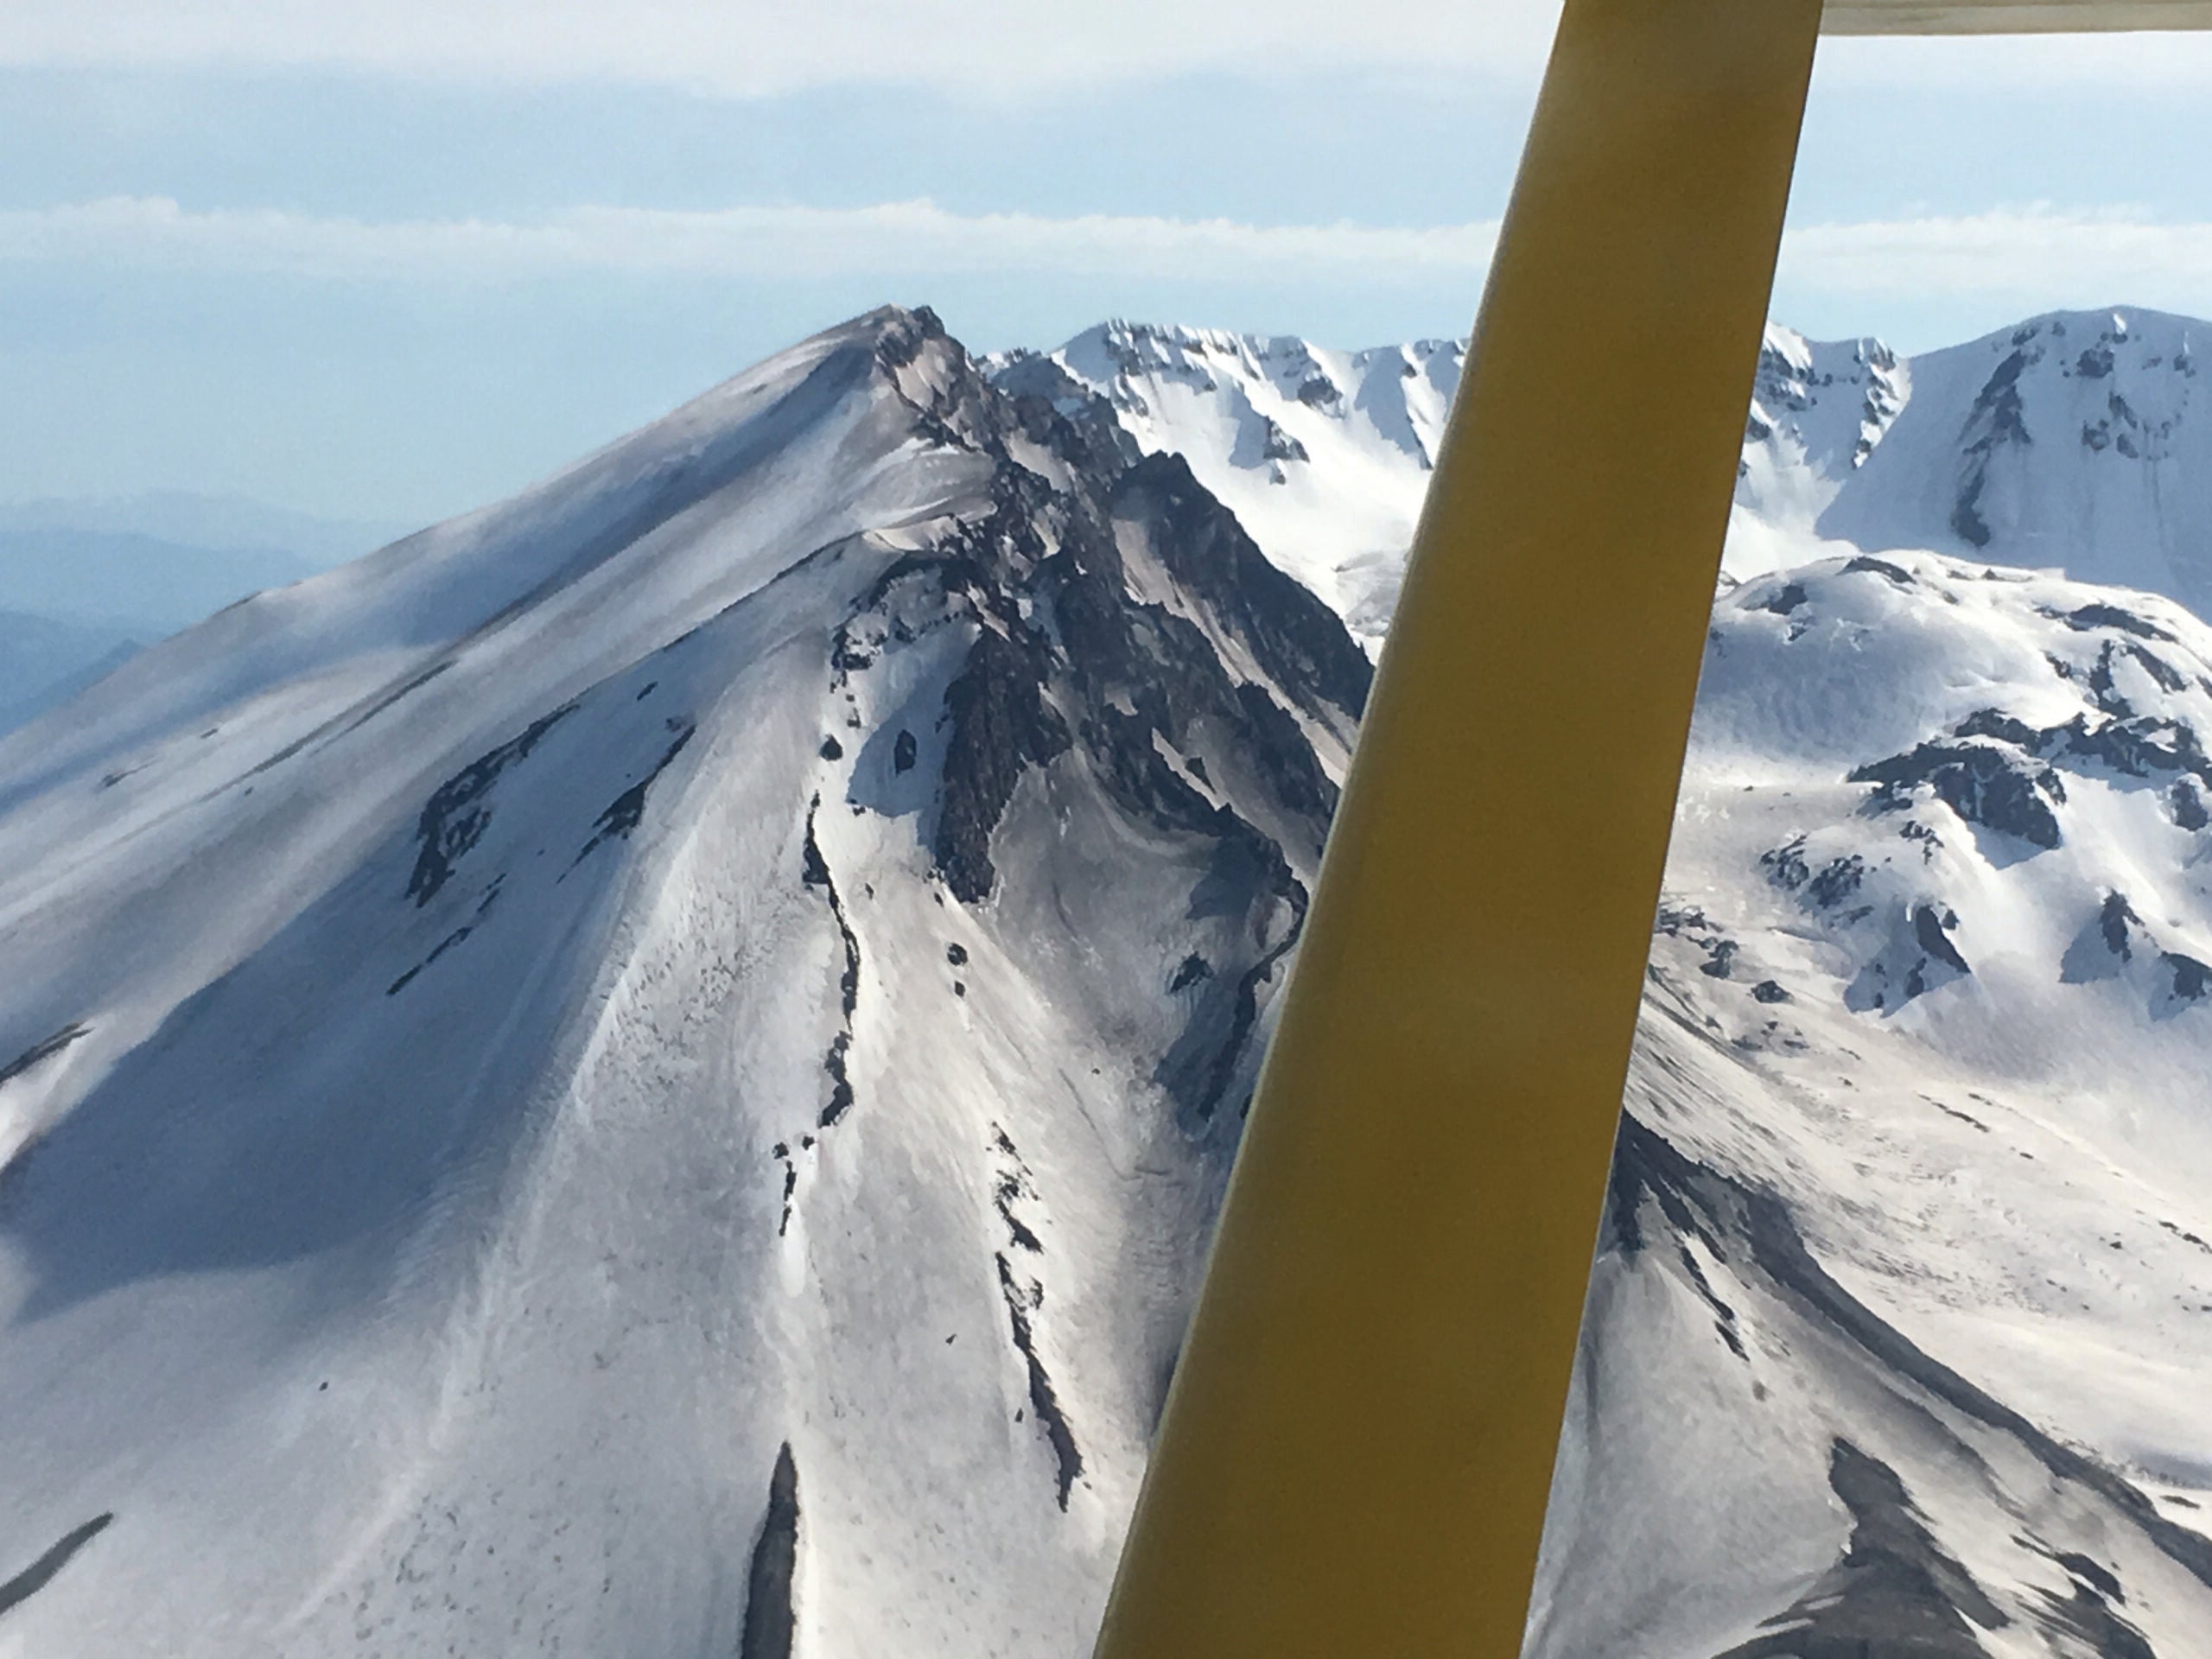 Airplane Mount St Helens